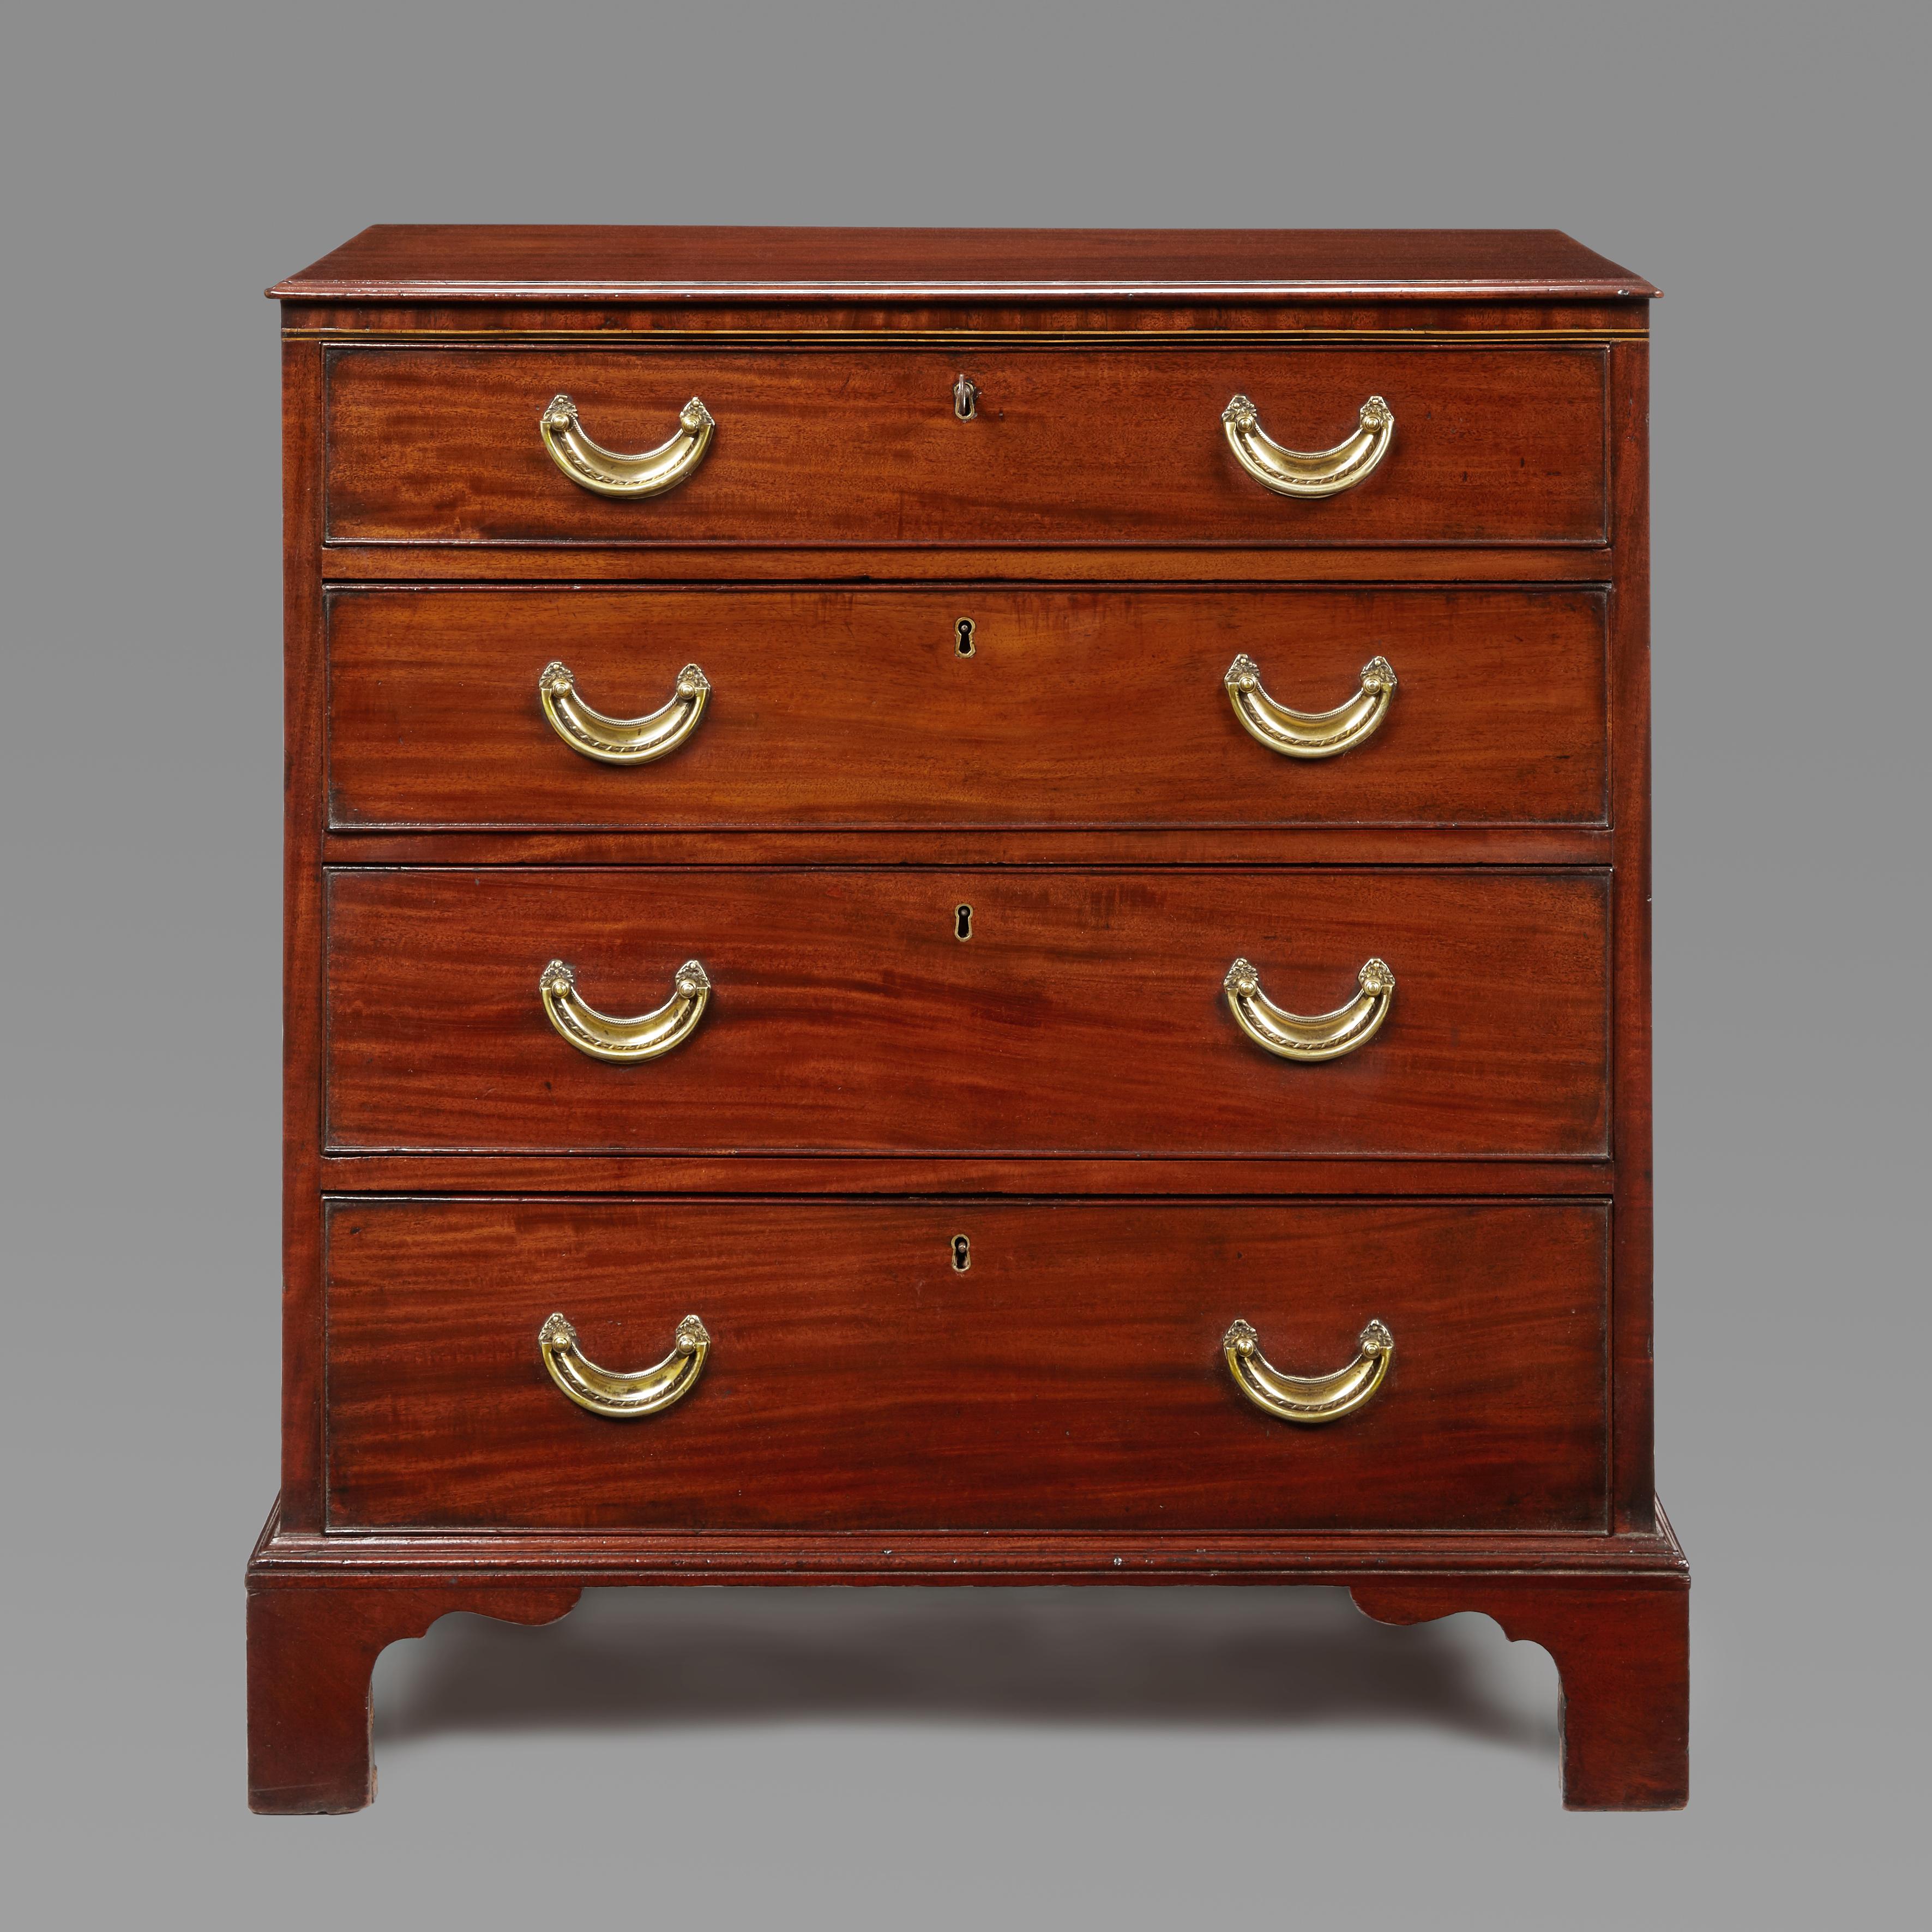 A Small Hepplewhite Period Mahogany Four-drawer Chest of pleasing Small proportions. The moulded top with an ebony and boxwood line inlay below .The cock-beaded drawers fitted with the original plate handles leading to bracket feet which are also